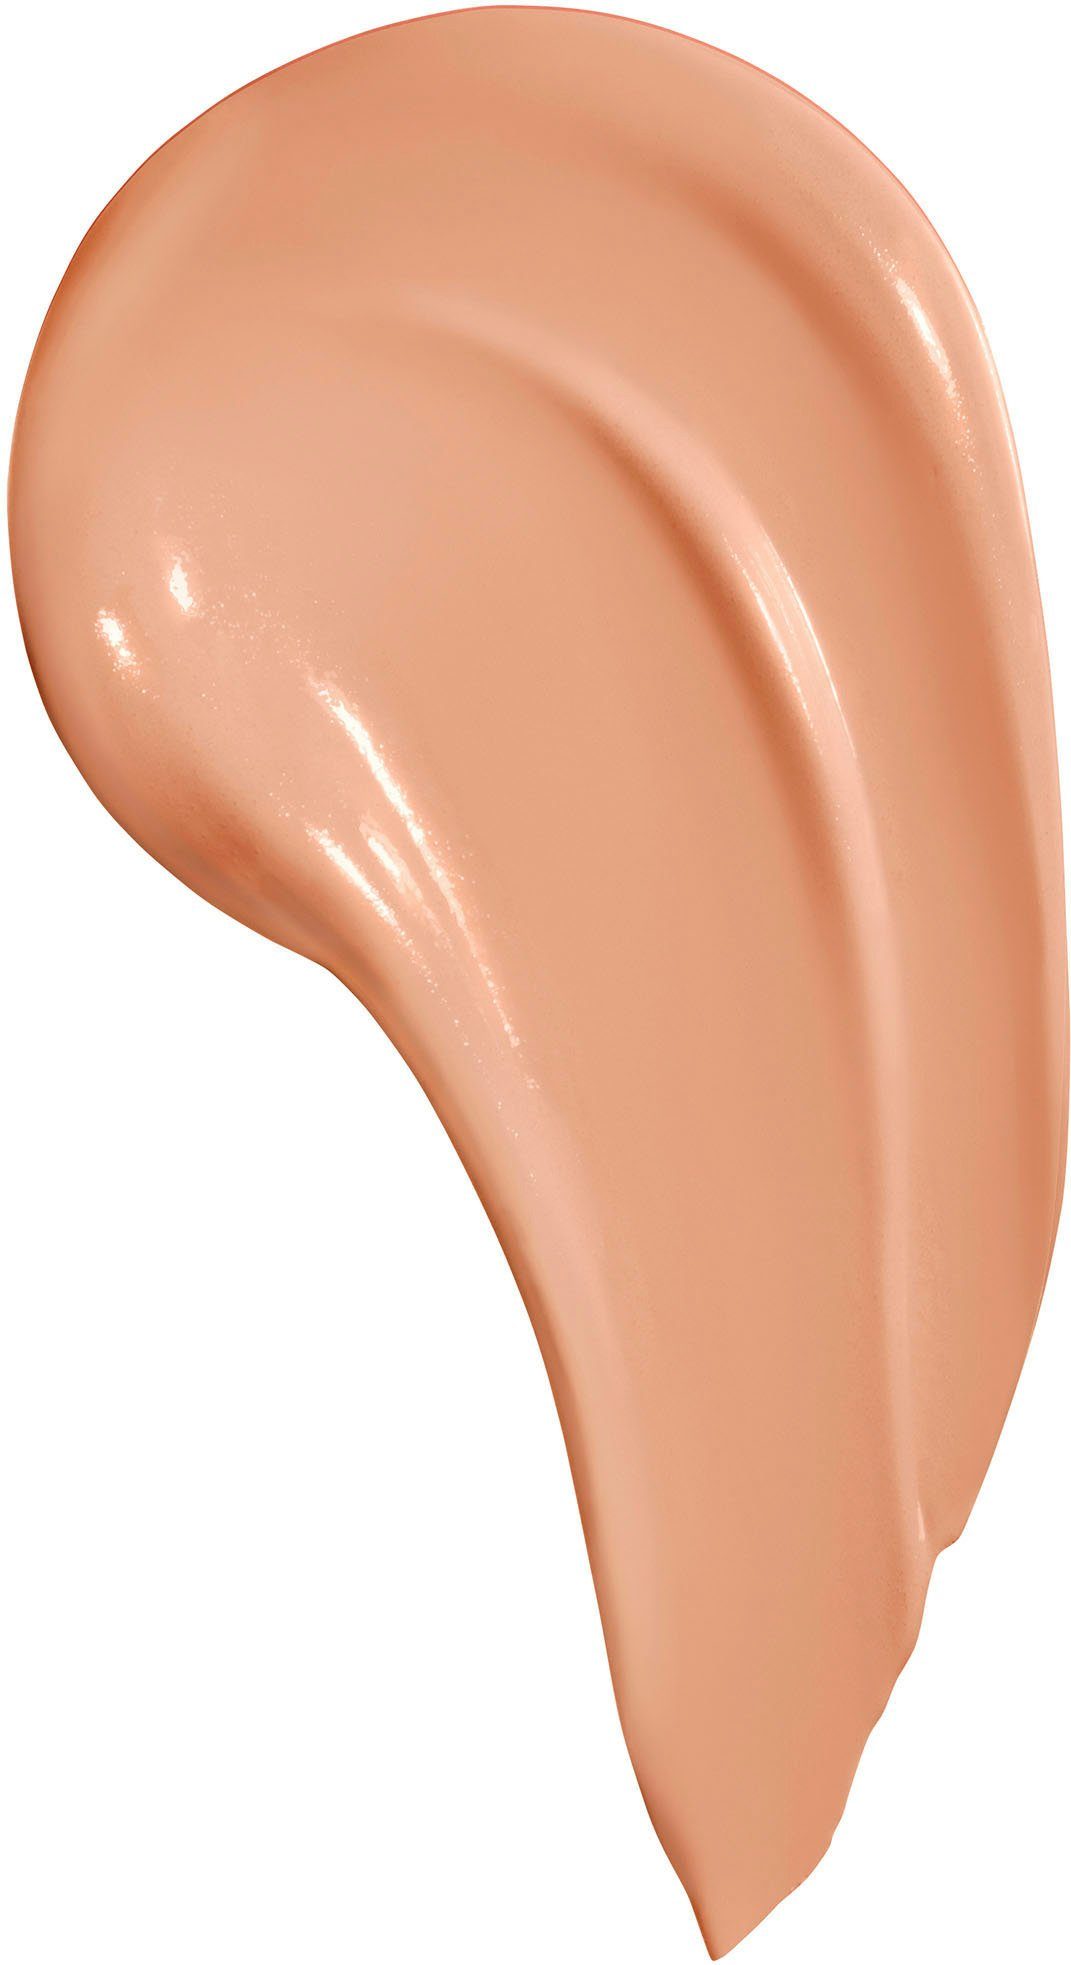 Wear 40 Stay NEW Super Foundation Active YORK MAYBELLINE Fawn